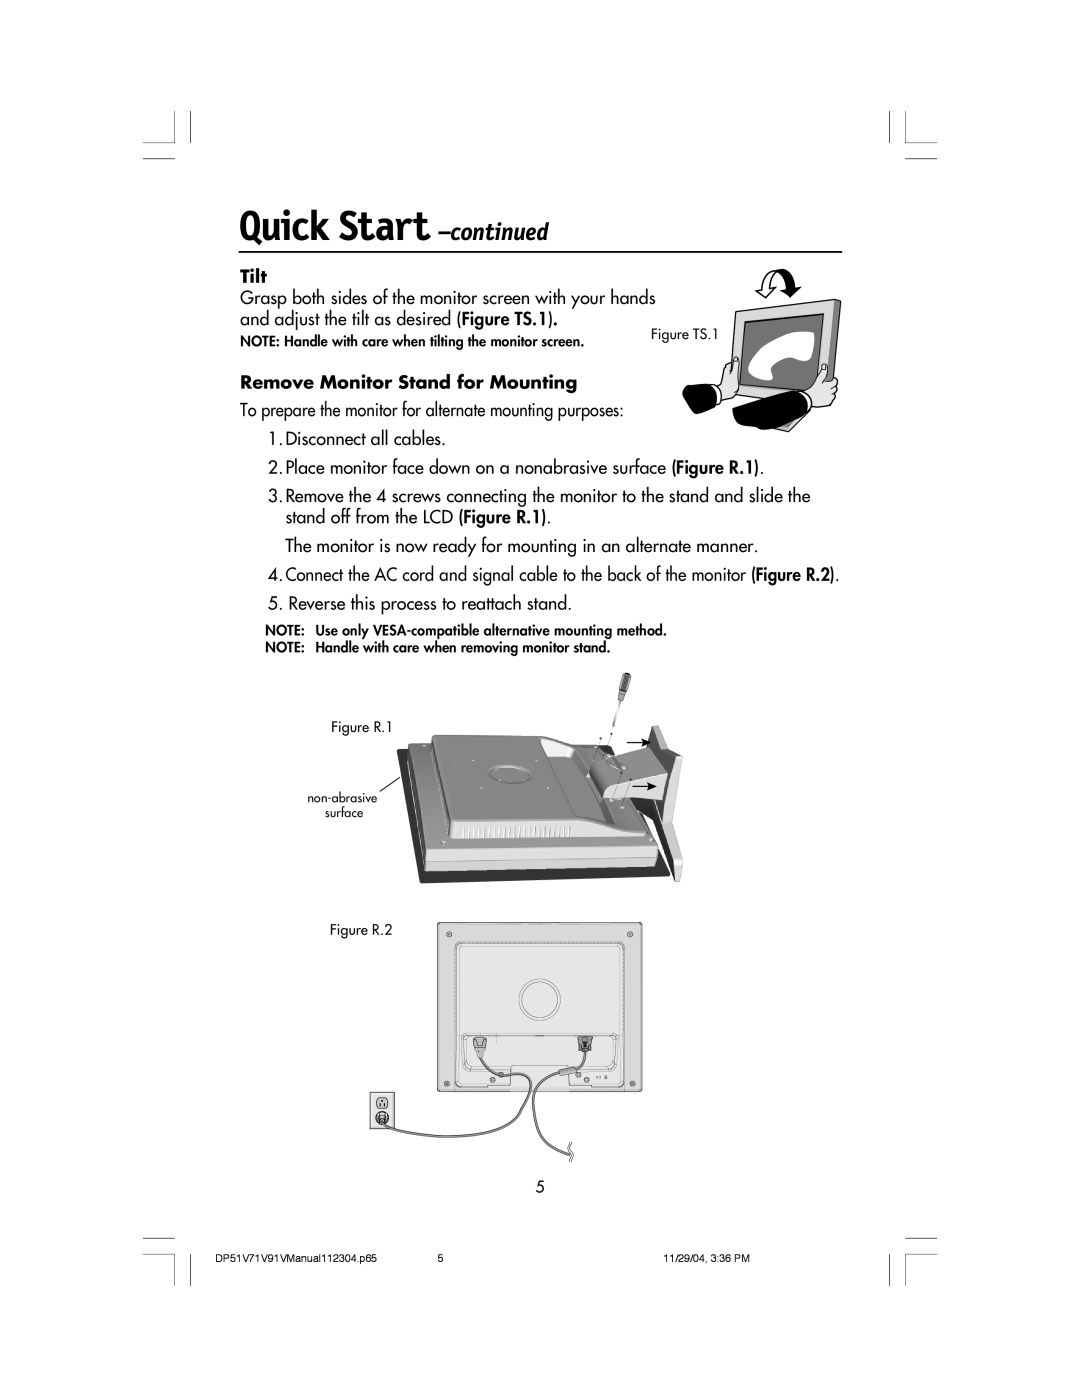 Mitsubishi Electronics V71LCD, V91LCD, V51LCD manual Tilt, Remove Monitor Stand for Mounting, Quick Start -continued 